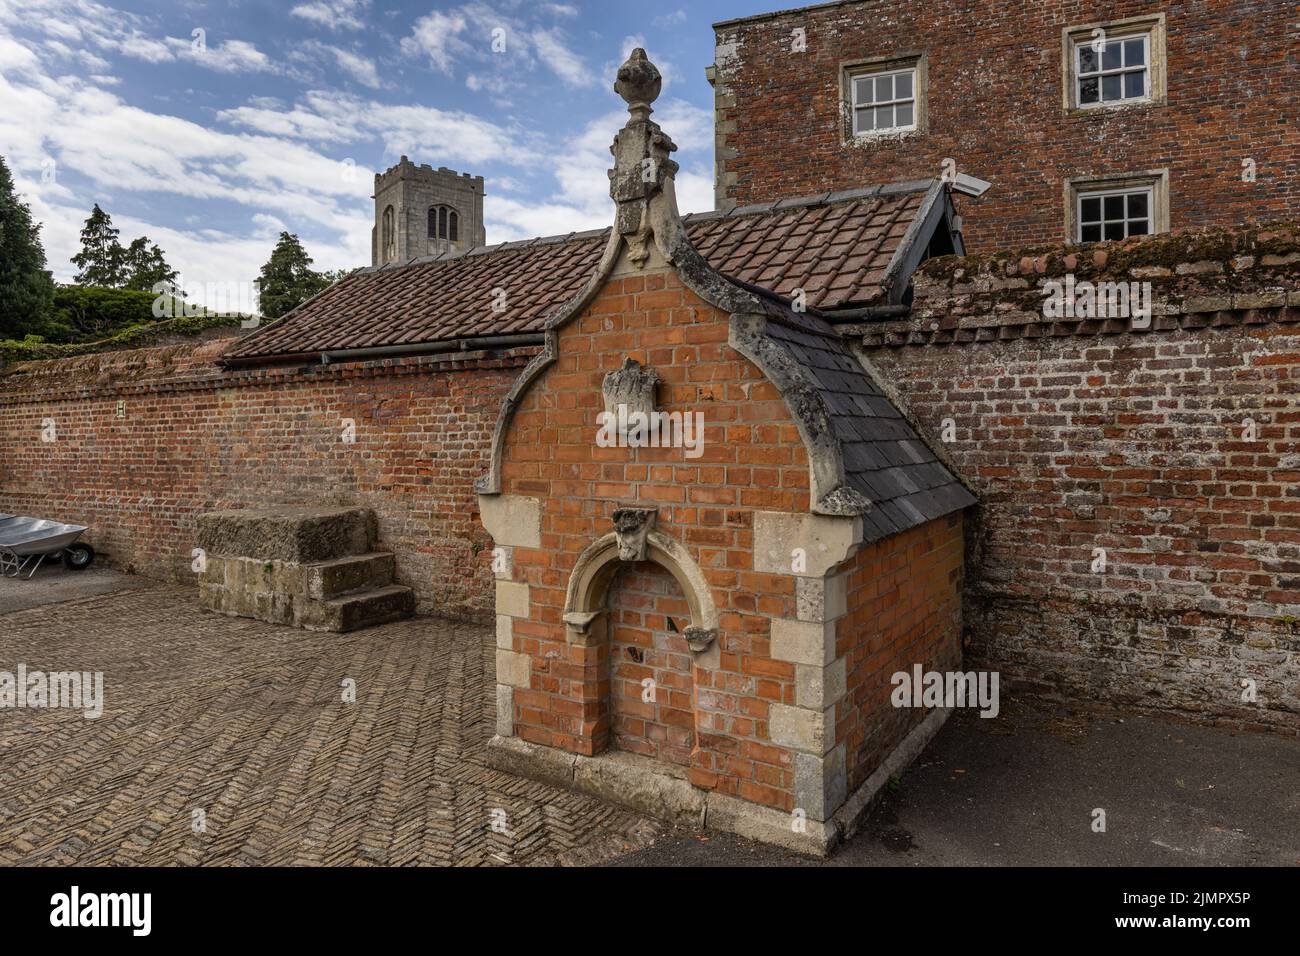 Dog kennel dated 1859, Burton Agnes Hall, a superb 17th century Elizabethan manor house in the East Riding of Yorkshire, England, Uk Stock Photo